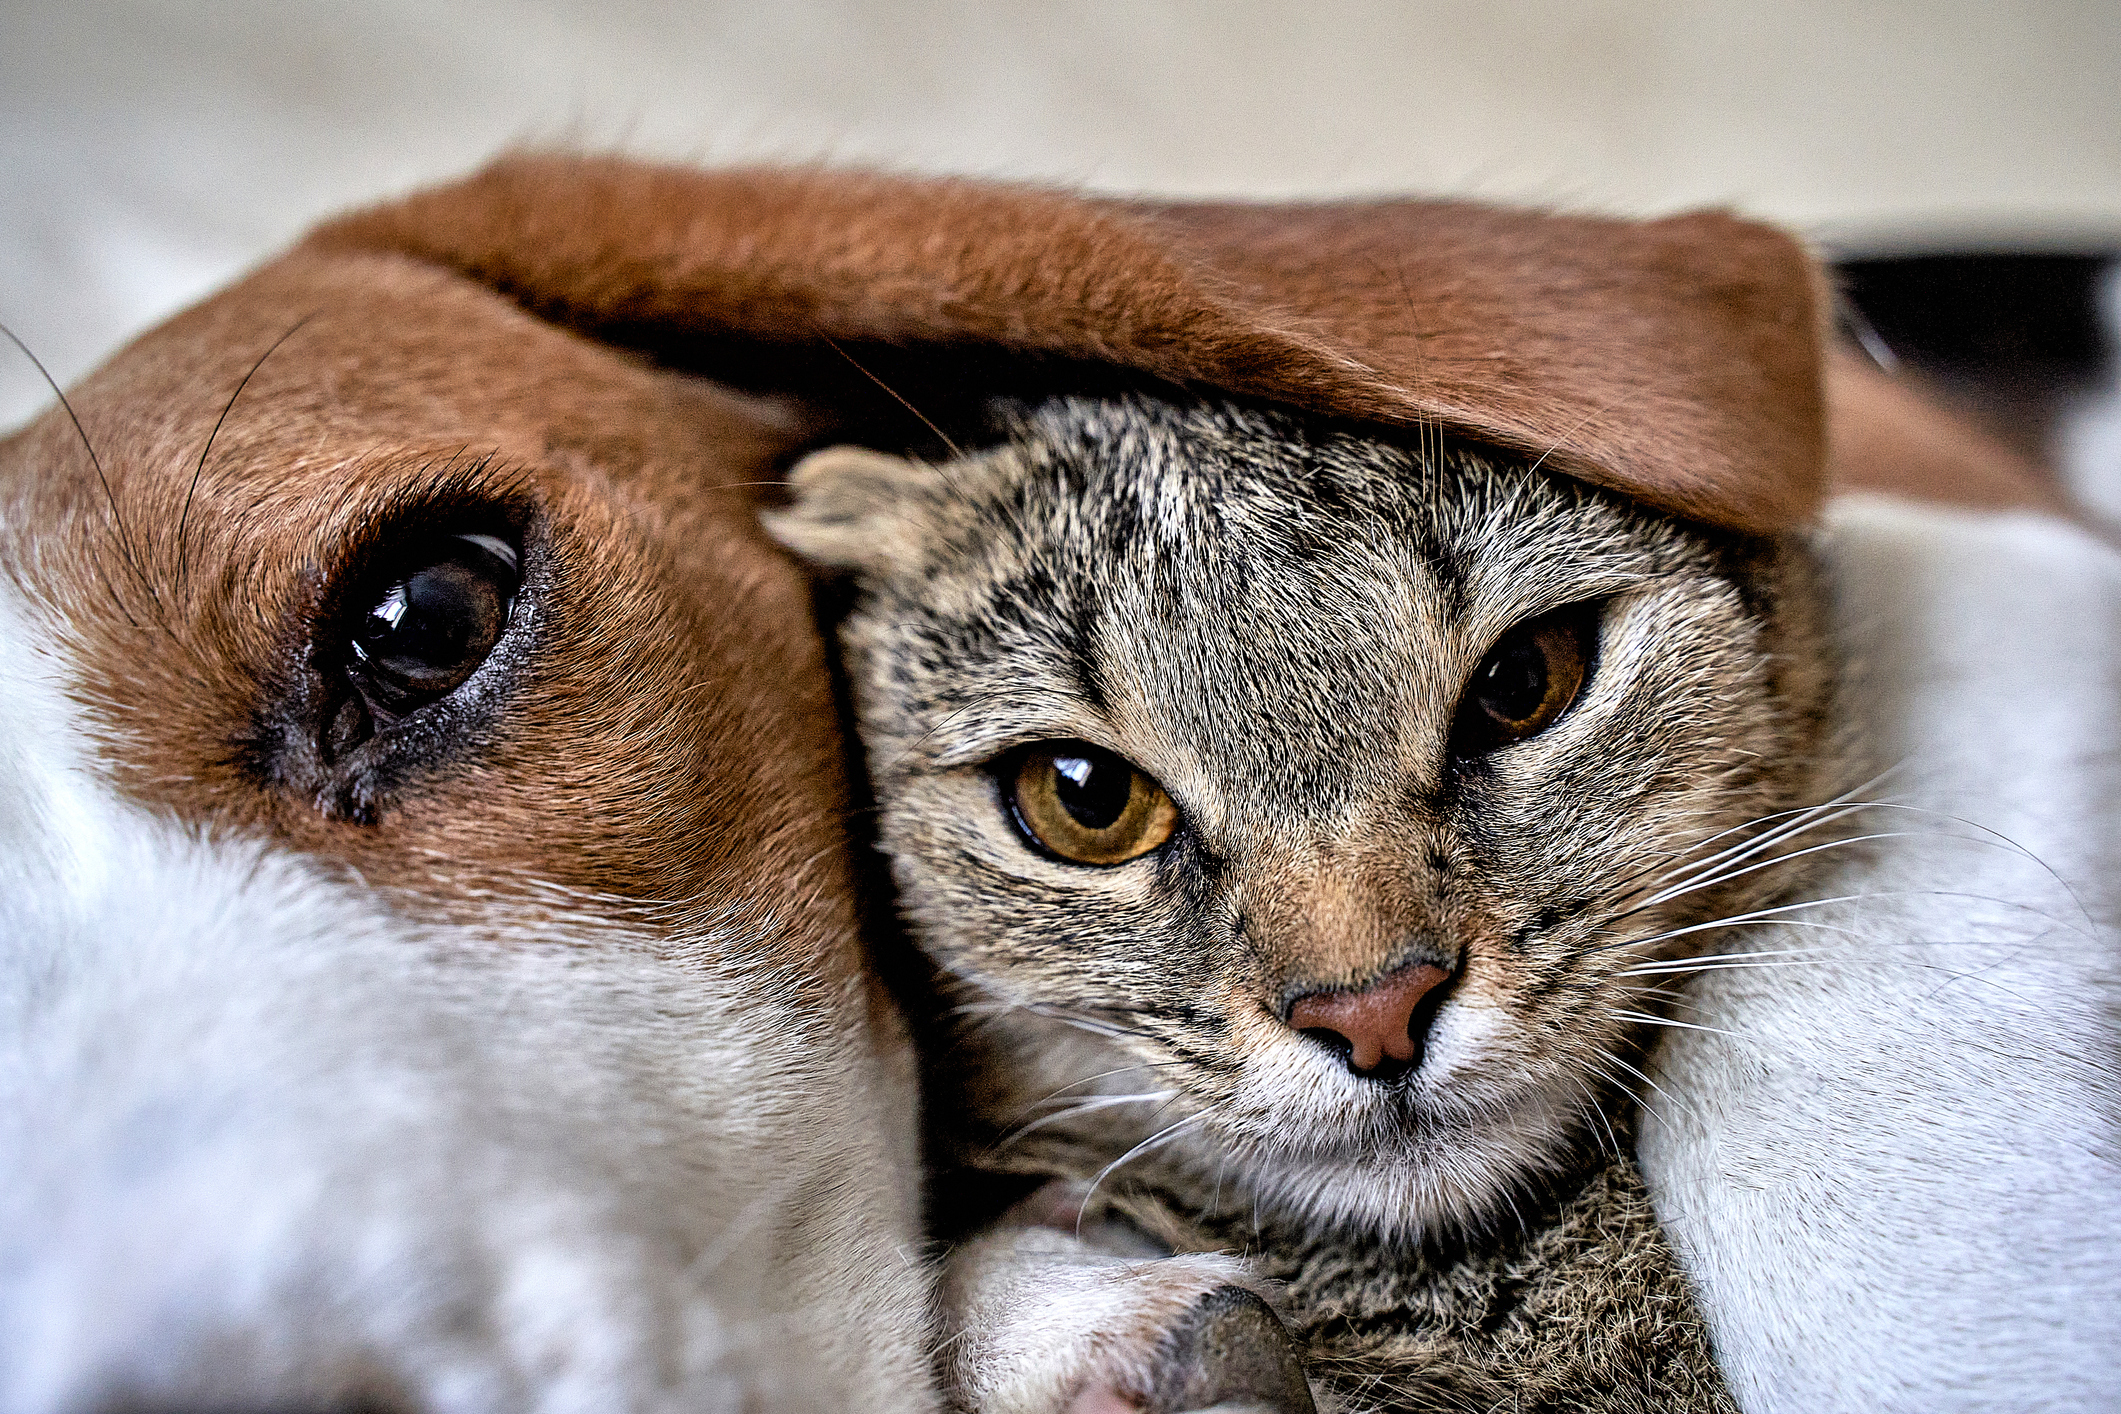 A close-up of a dog and a cat cuddling